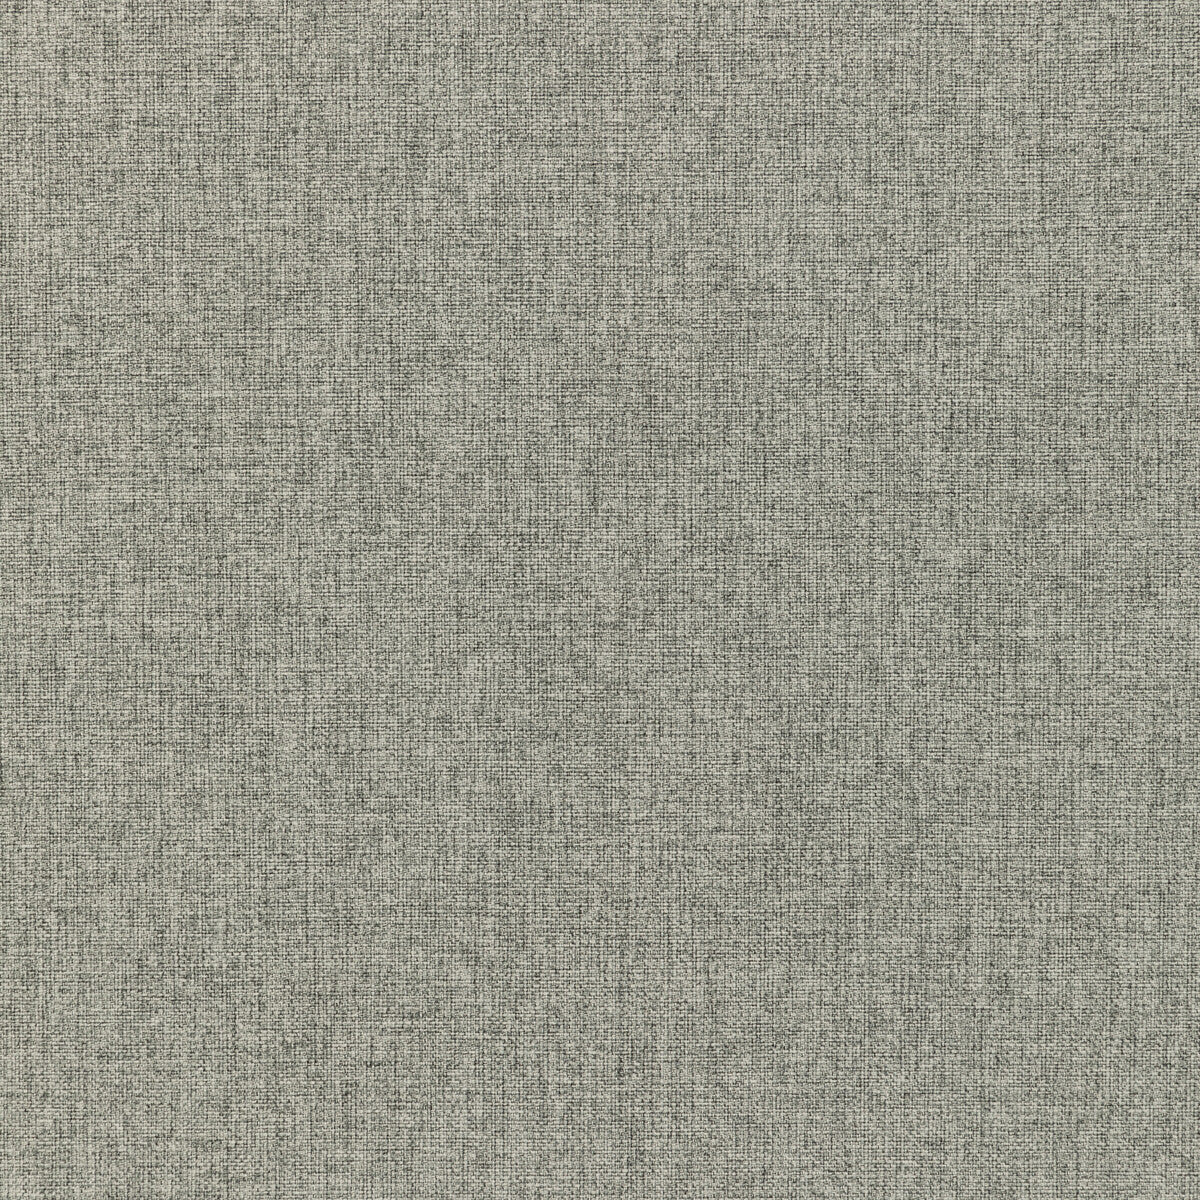 Fortify fabric in pumice color - pattern 36257.106.0 - by Kravet Contract in the Supreen collection